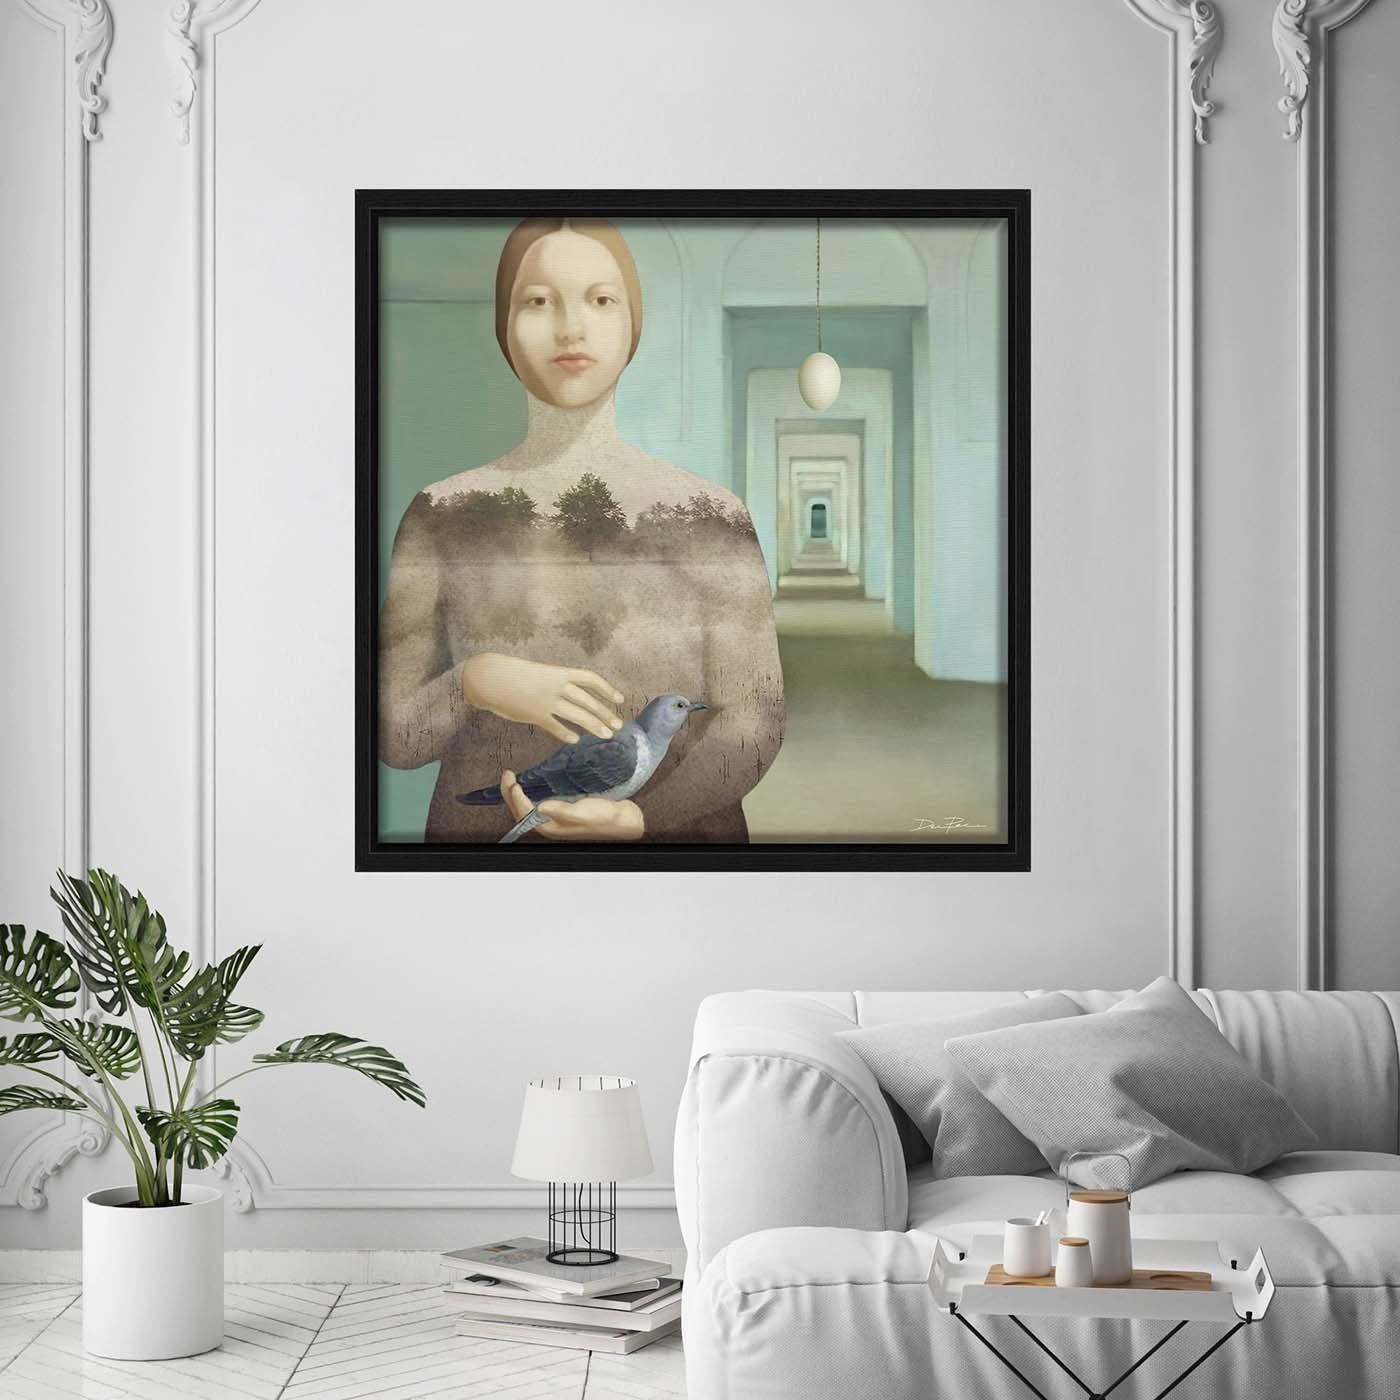 Inspired by Piero della Francesca's Brera Madonna, this Pop-Surrealist digital painting showcases the symbol of life, an egg, which has been transformed into a light-giving chandelier at the top right. A female figure caresses a feather in her